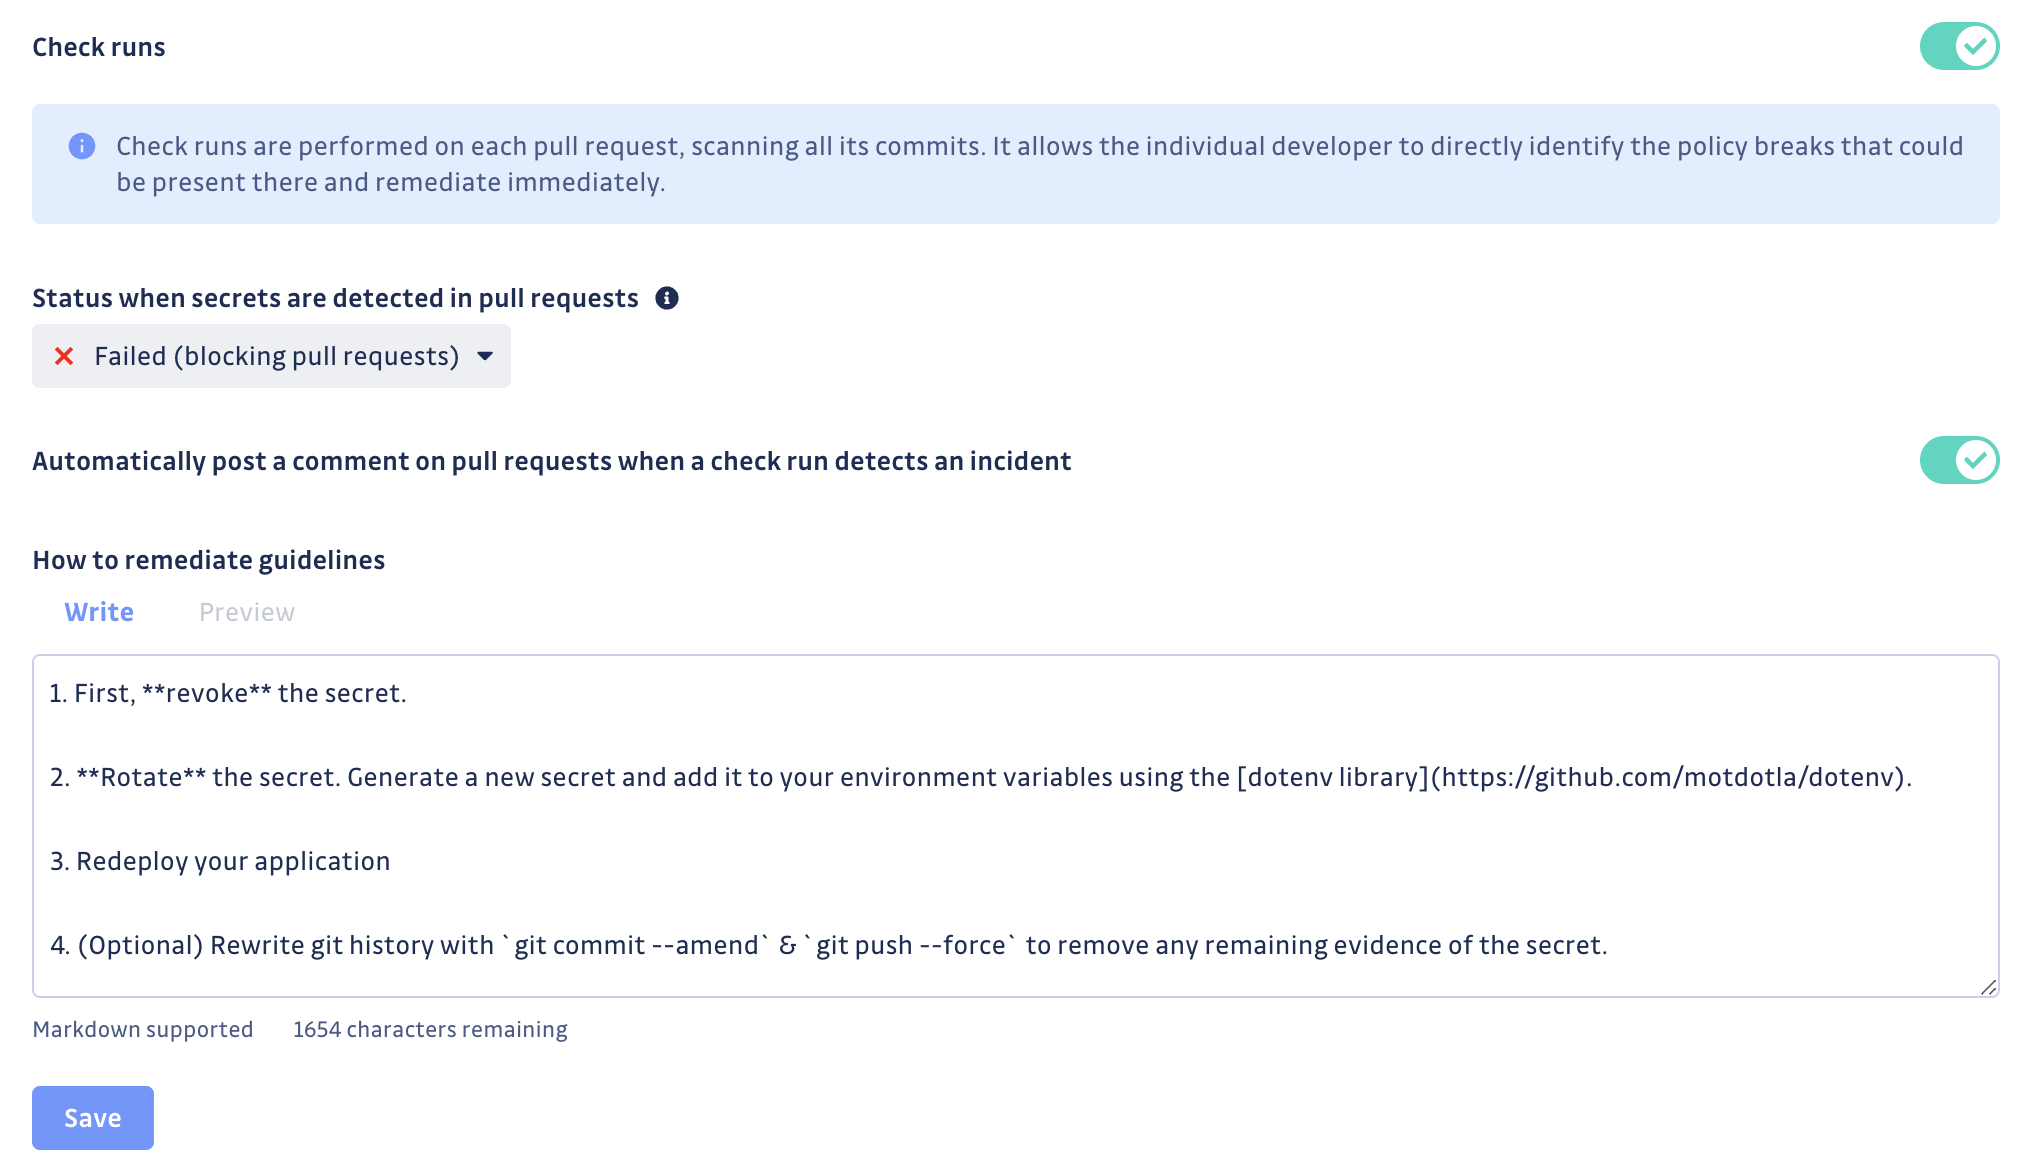 Screenshot of GitGuardian customizable remediation guidelines for GitHub pull requests